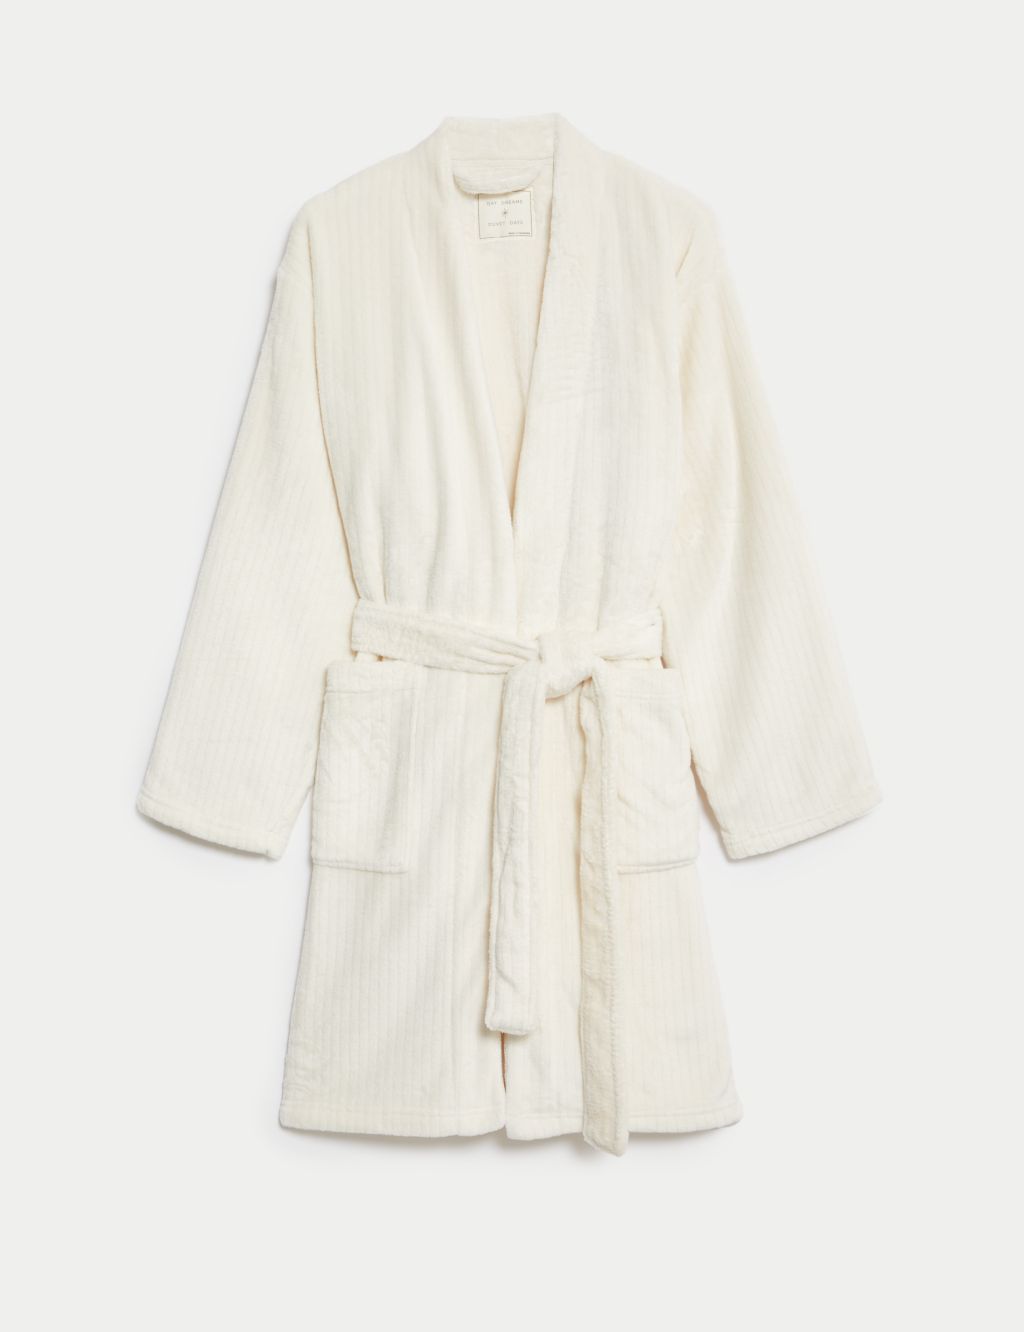 Fleece Ribbed Short Dressing Gown image 2